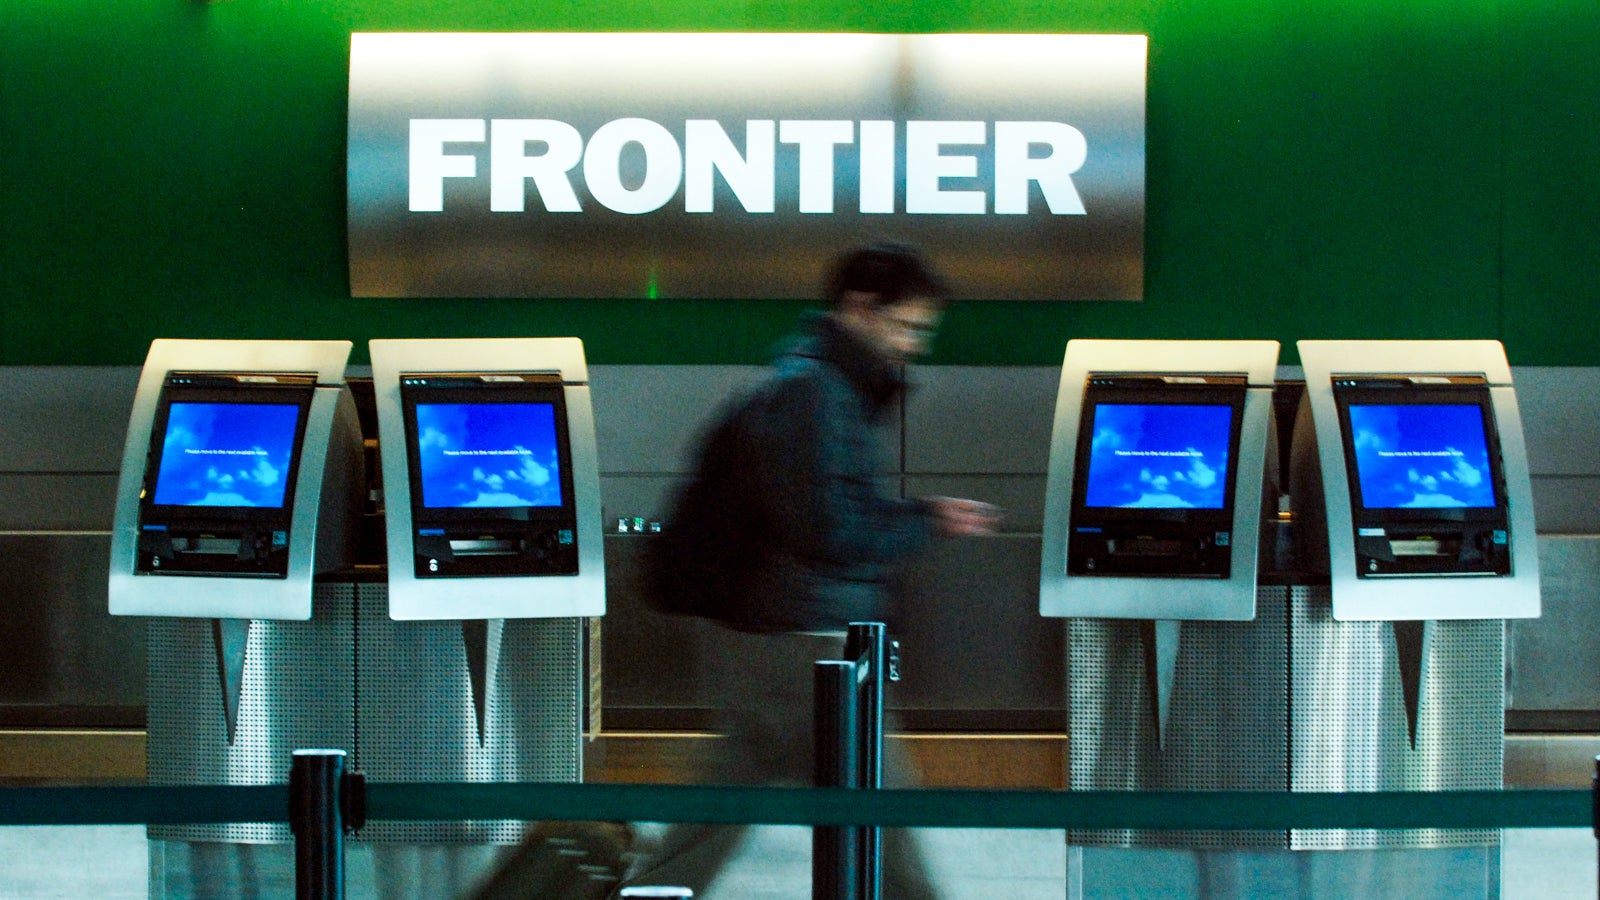 (HC) Frontier-Darius Fatemi, 39, of Denver pass by the ticket counter of Frontier Airlines at DIA on Friday. The Airline filed for Chapter 11 bankruptcy late Thursday in Manhattan. The Denver Post / Hyoung Chang